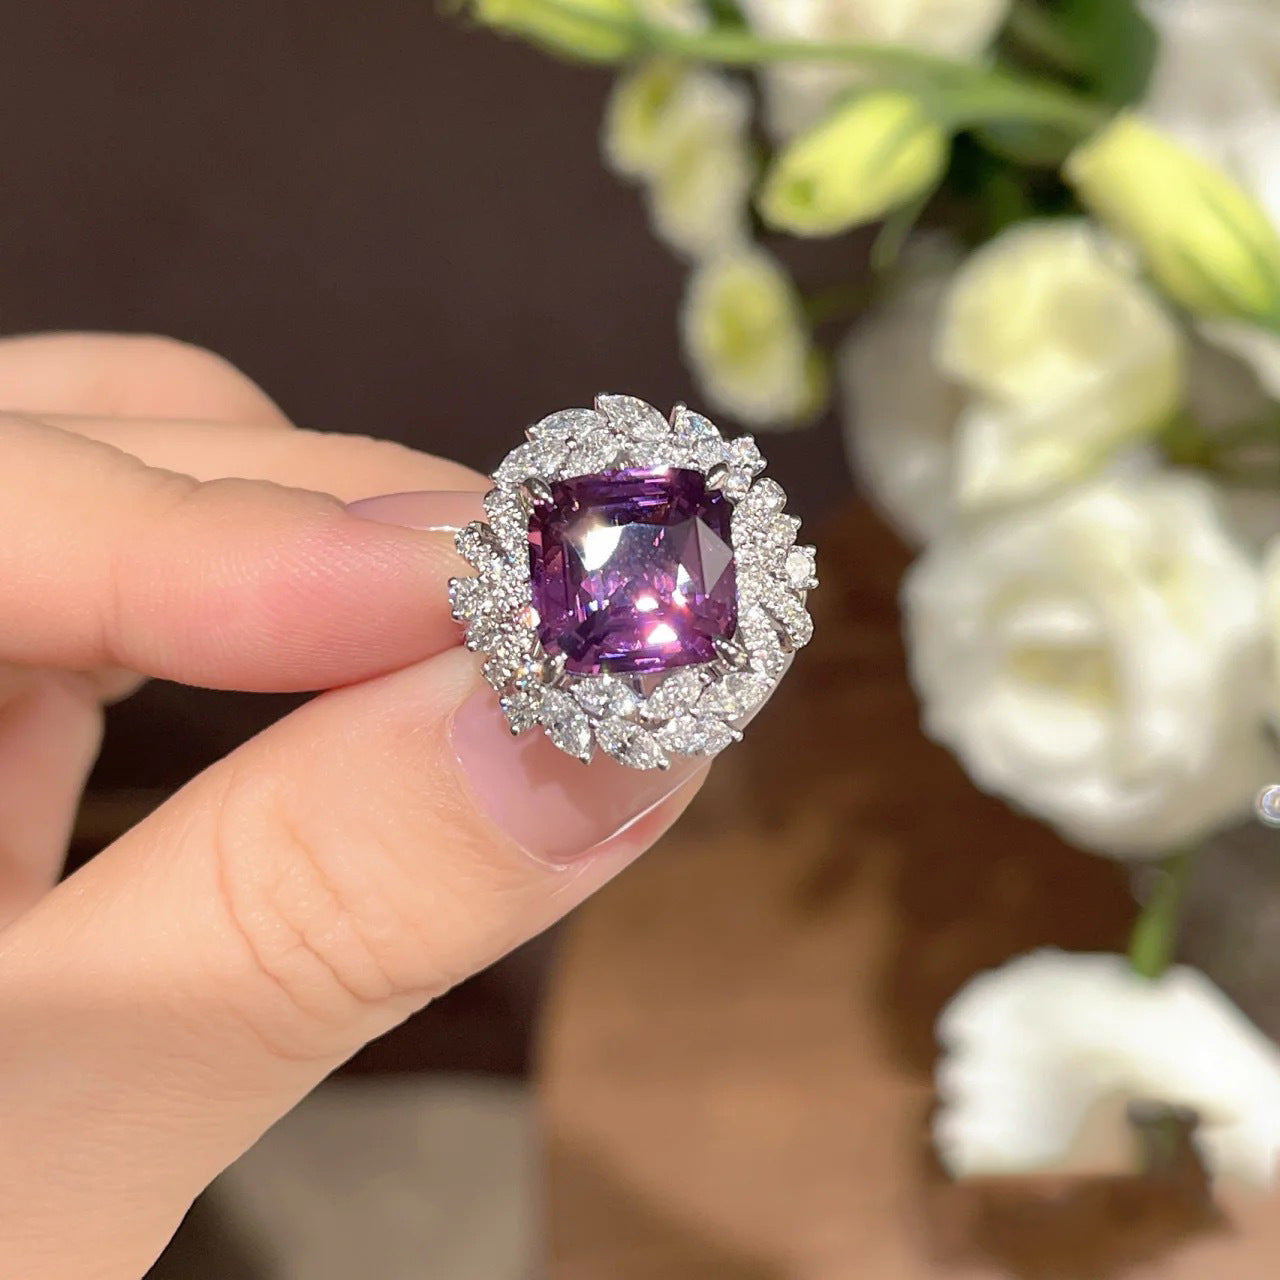 A woman's hand holding a purple Stand out Beautiful Amethyst Gemstone Ring For Women I NEED IT and diamond ring by Maramalive™.